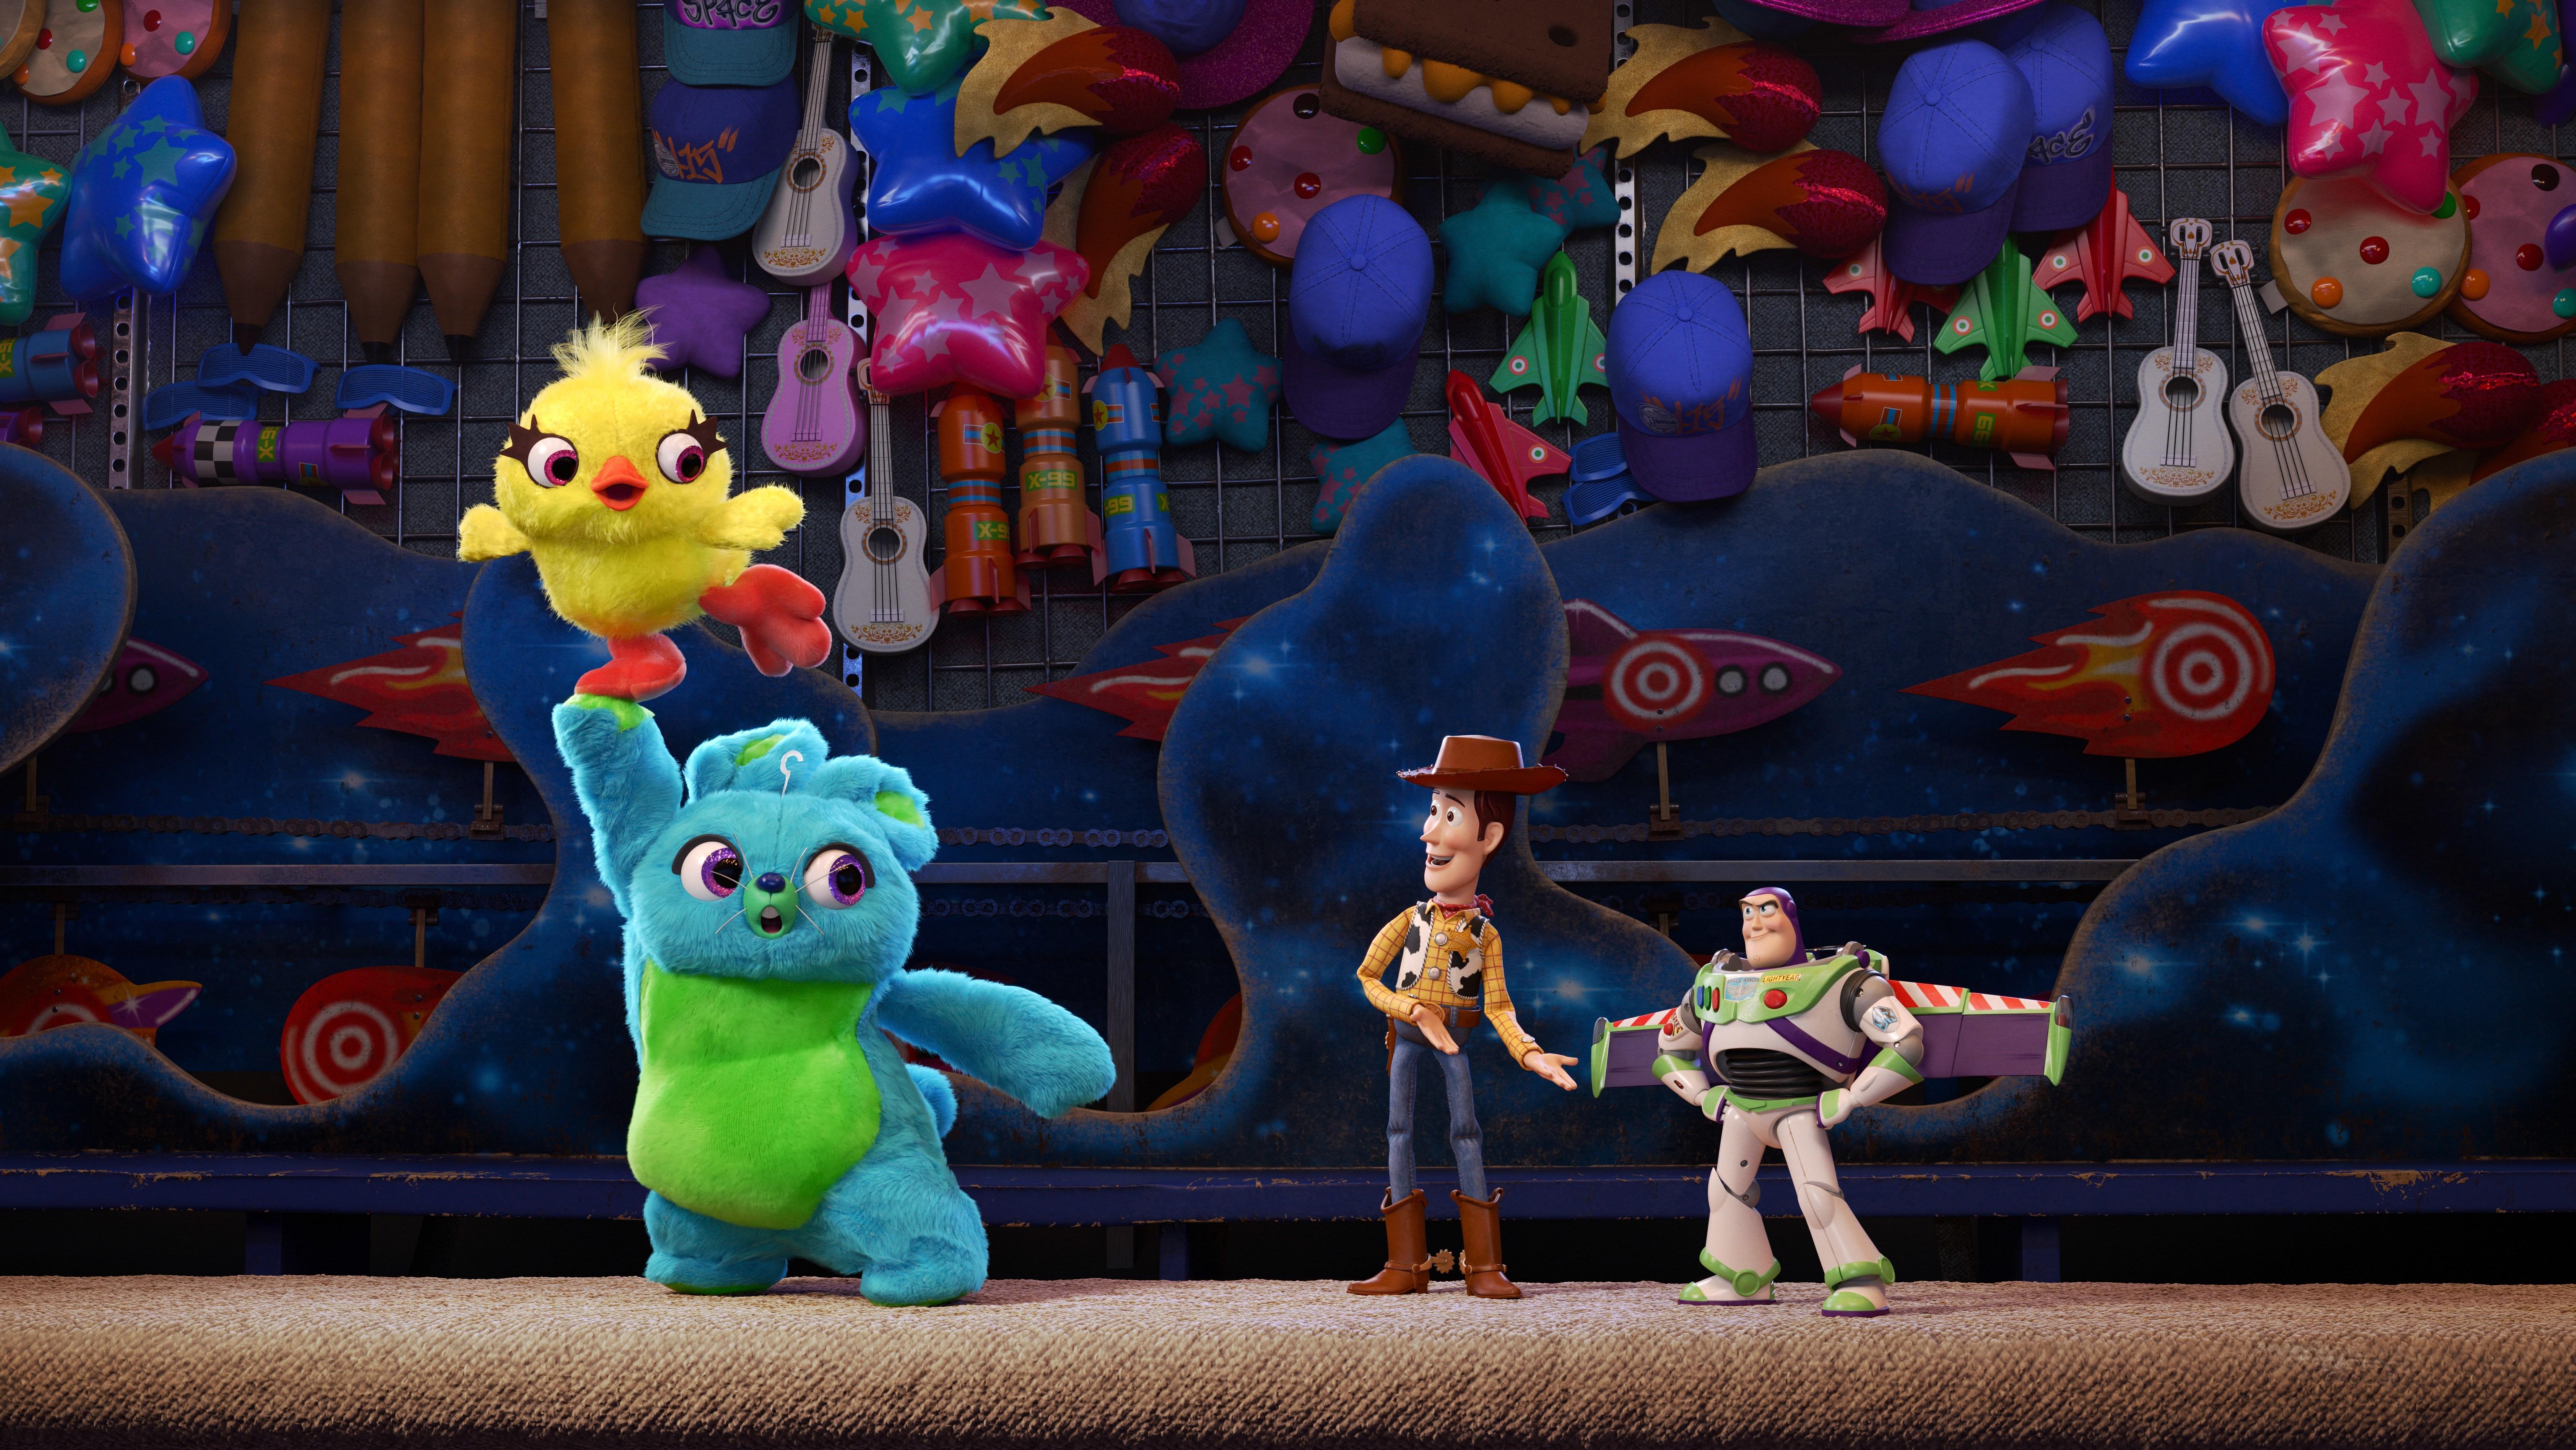 Toy Story 4 Image, HD Movies 4K Wallpaper, Image, Photo